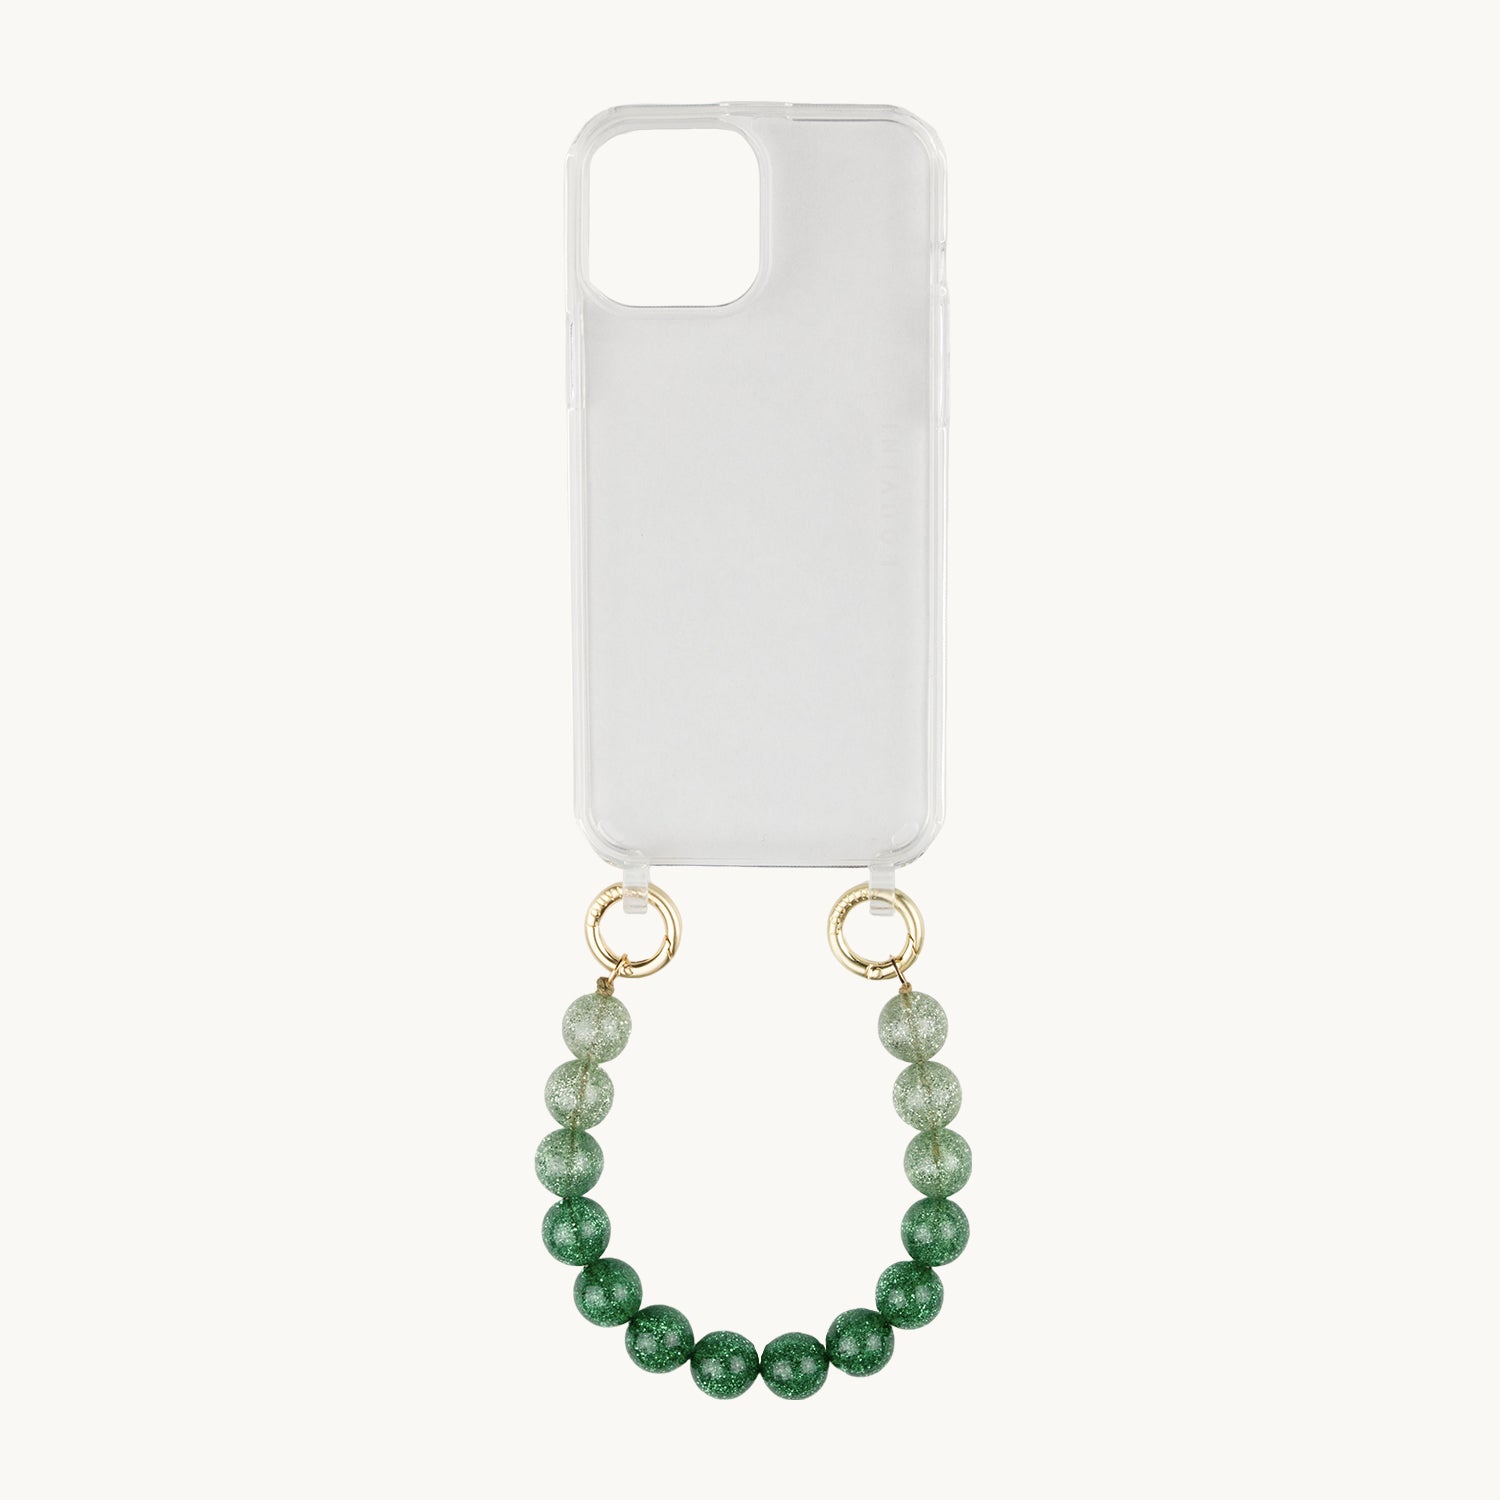 CHARLIE IPHONE CASE & GREEN PETIT BILLY CHAIN